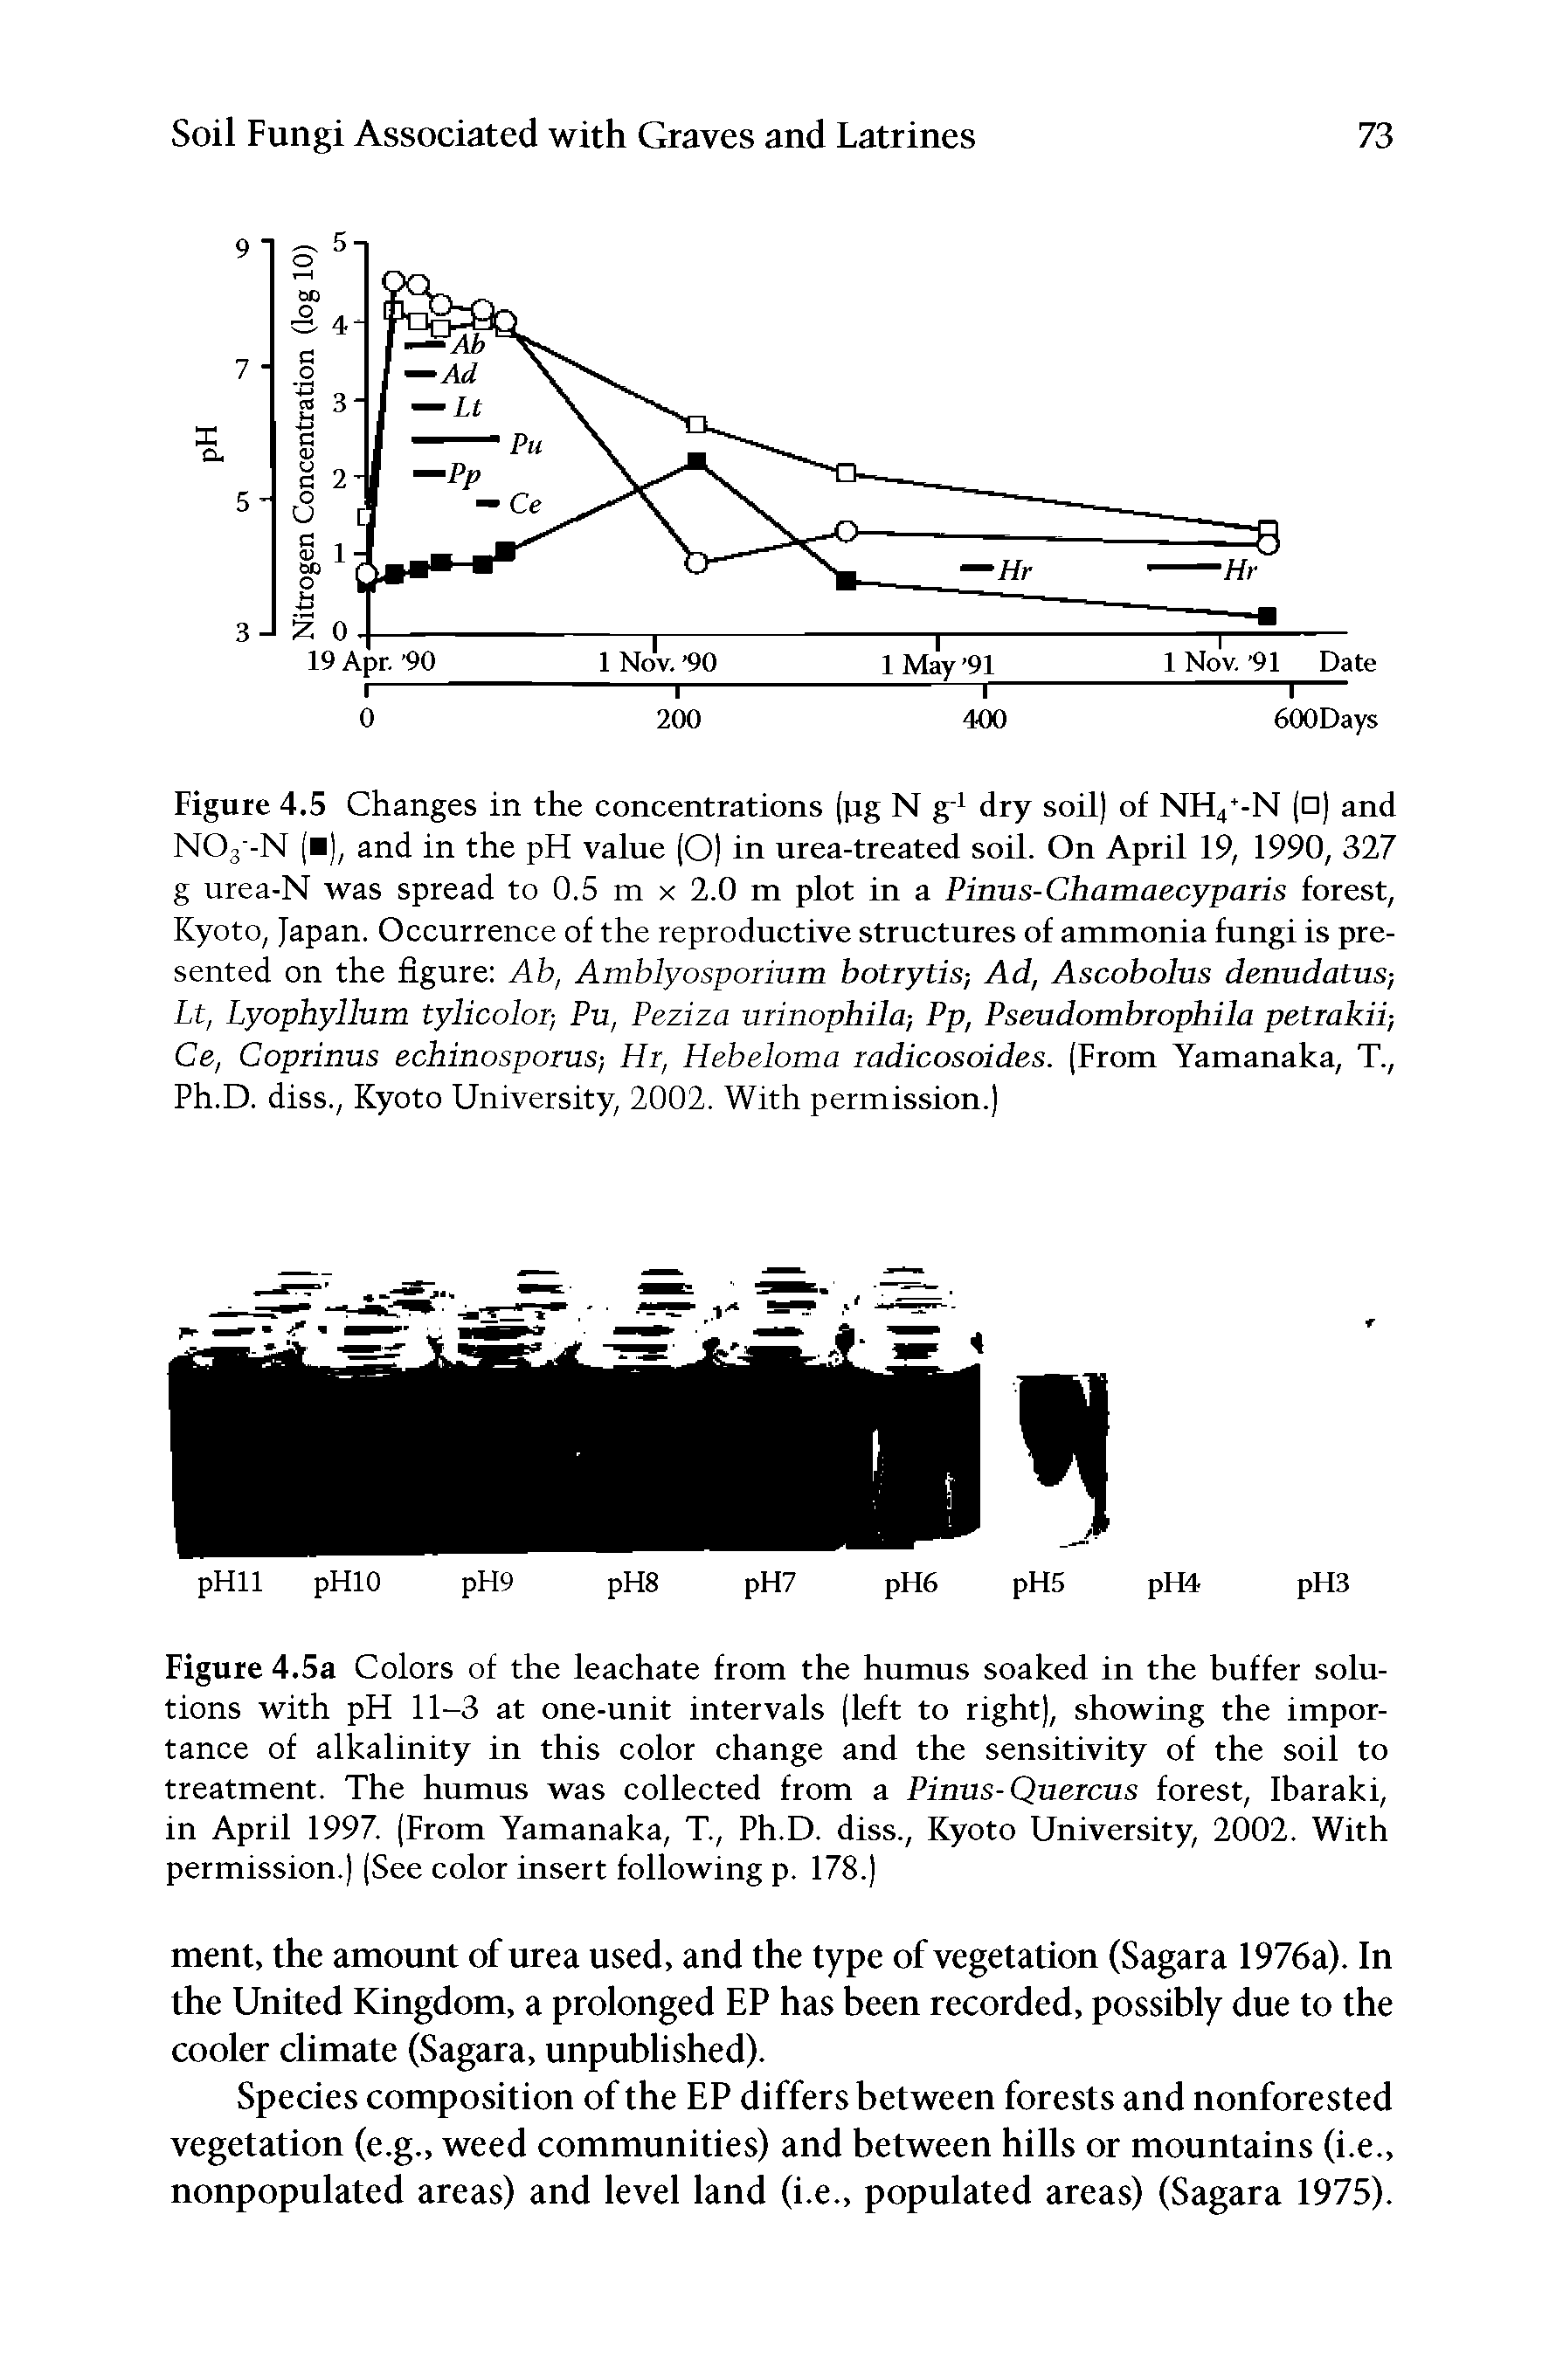 Figure 4.5 Changes in the concentrations (jig N gJ dry soil) of NH4 -N ( ) and N03 -N ( ), and in the pH value (O) in urea-treated soil. On April 19, 1990, 327 g urea-N was spread to 0.5 m x 2.0 m plot in a Pinus-Chamaecyparis forest, Kyoto, Japan. Occurrence of the reproductive structures of ammonia fungi is presented on the figure Ab, Amblyospormm botrytis-, Ad, Ascobolus denudatus-, Lt, Lyophyllum tylicolor-, Pu, Peziza urinophila-, Pp, Pseudombrophila petrakii-, Ce, Coprinus echinosporus-, Hr, Hebeloma radicosoides. (From Yamanaka, T., Ph.D. diss., Kyoto University, 2002. With permission.)...